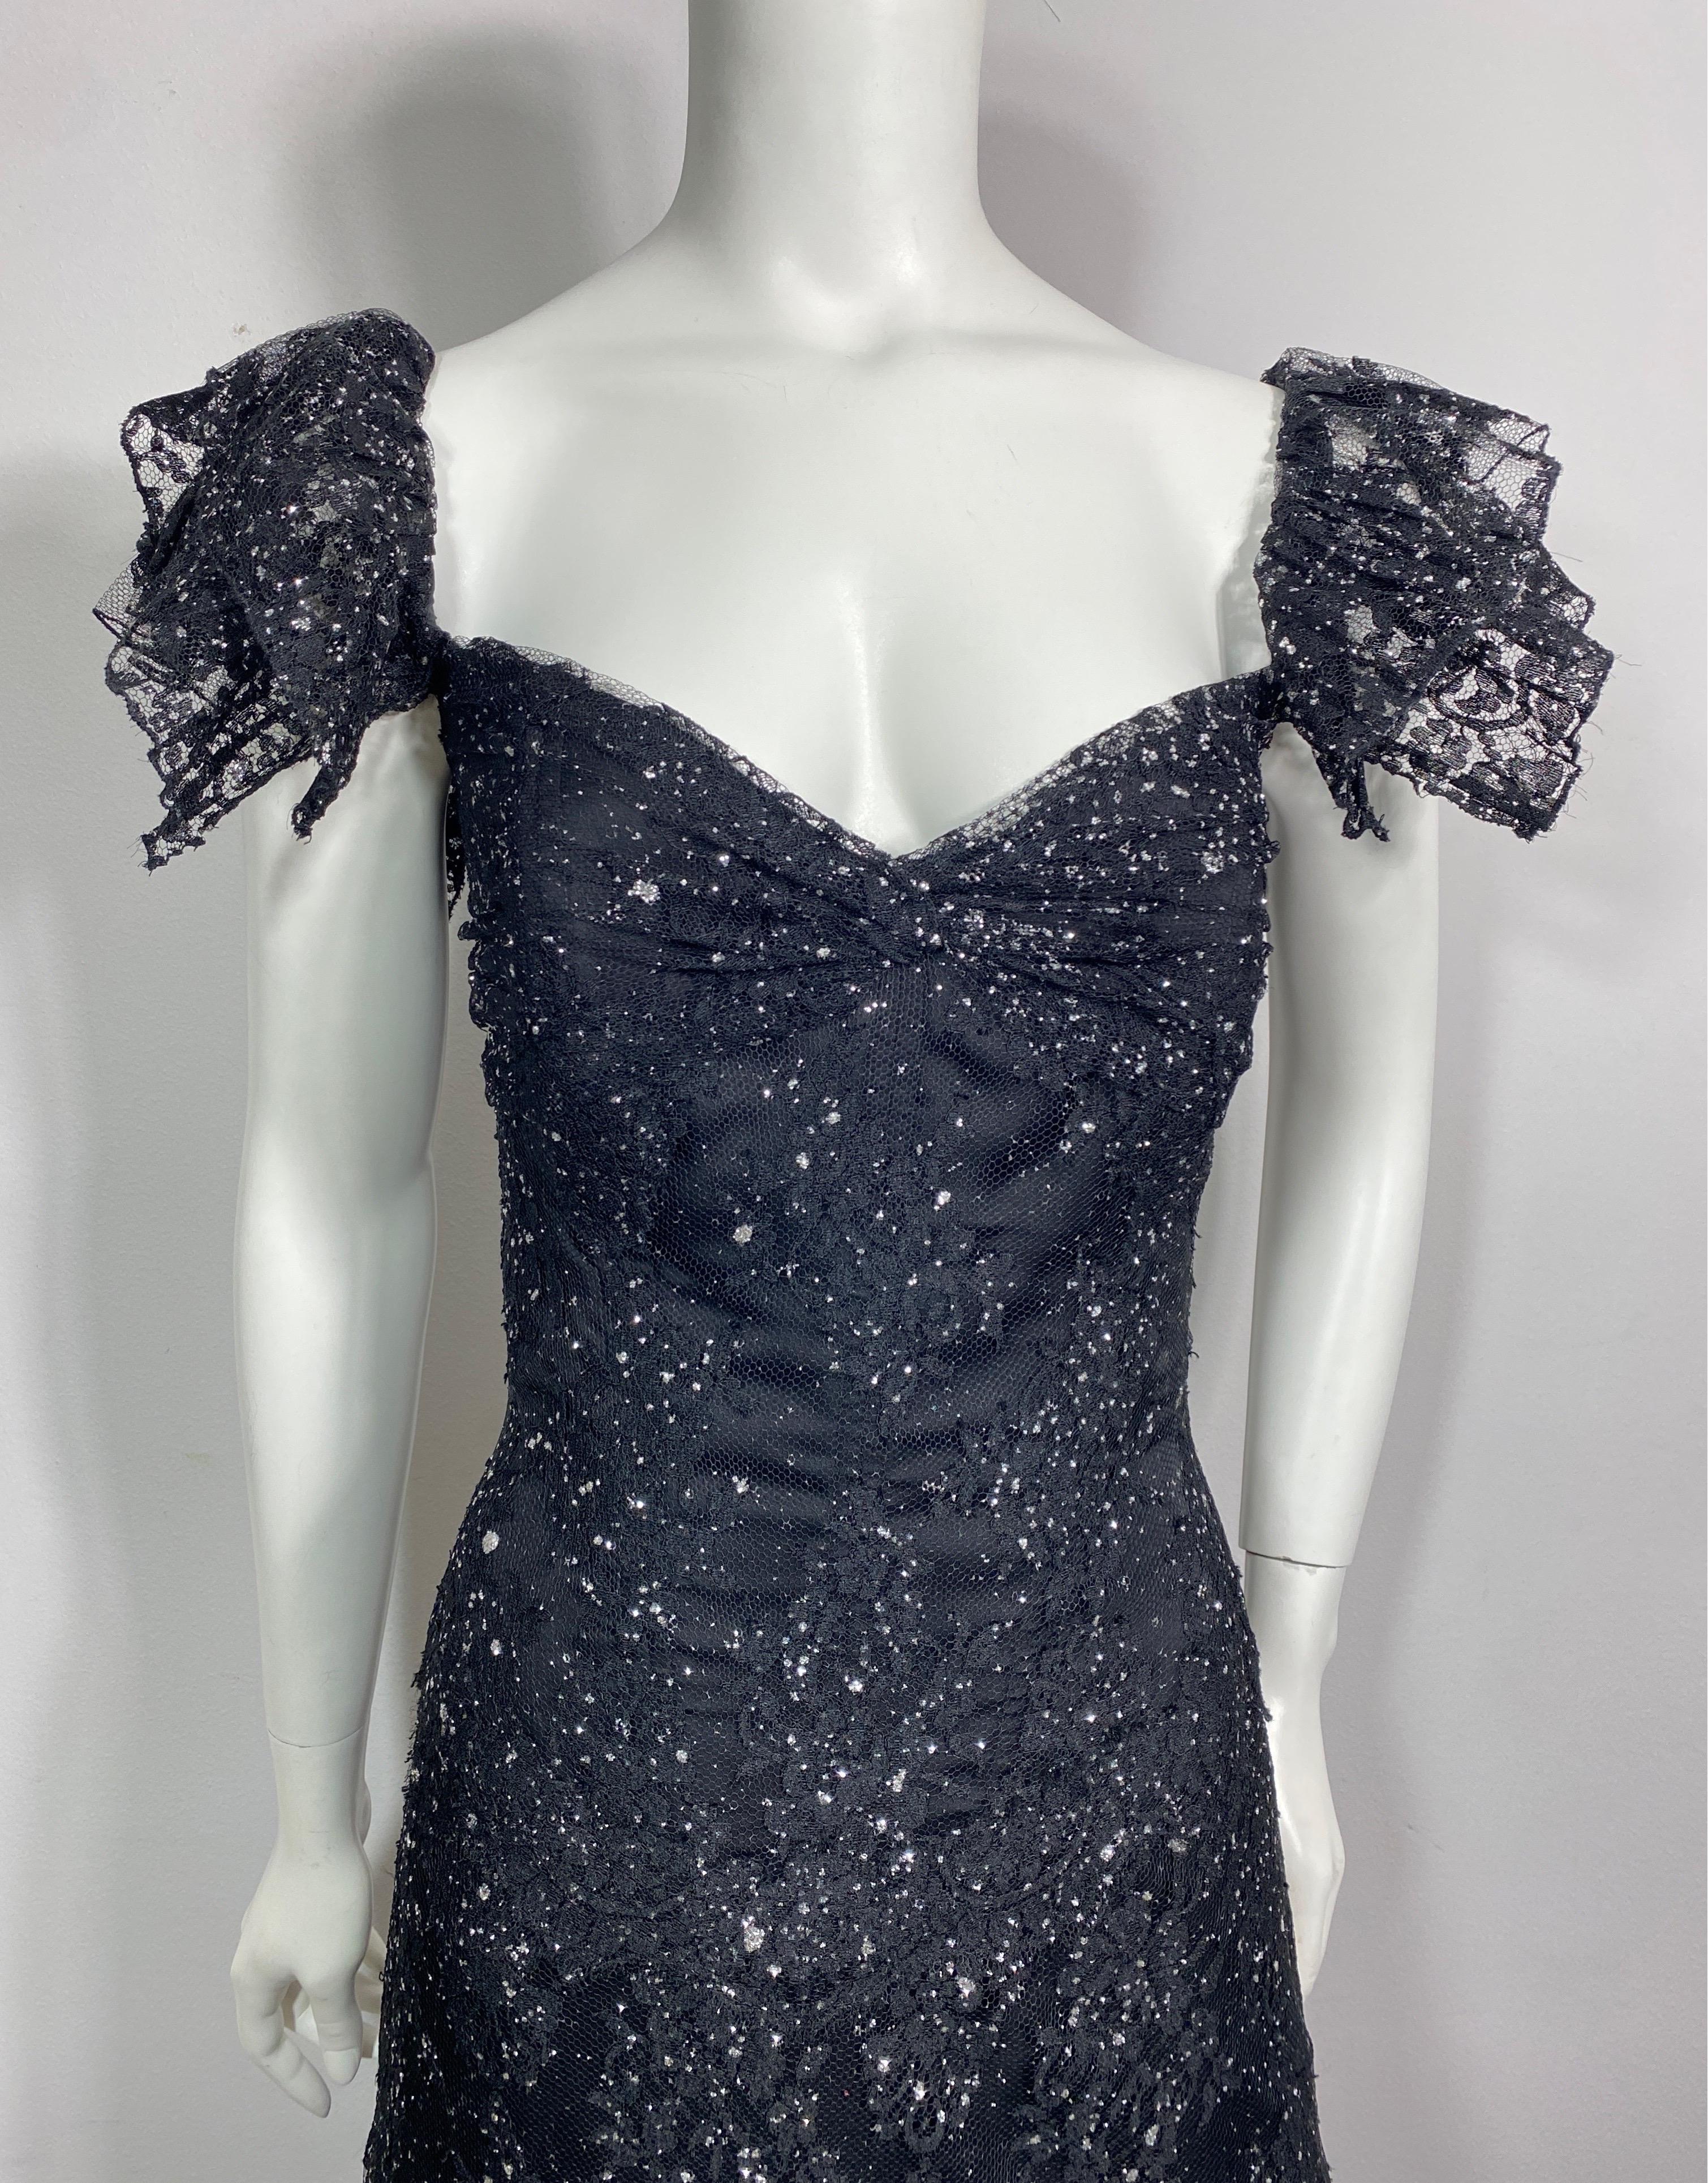 Vicky Tiel Black and Silver Tulle Lace Off the Shoulder Gown - 42 In Excellent Condition For Sale In West Palm Beach, FL